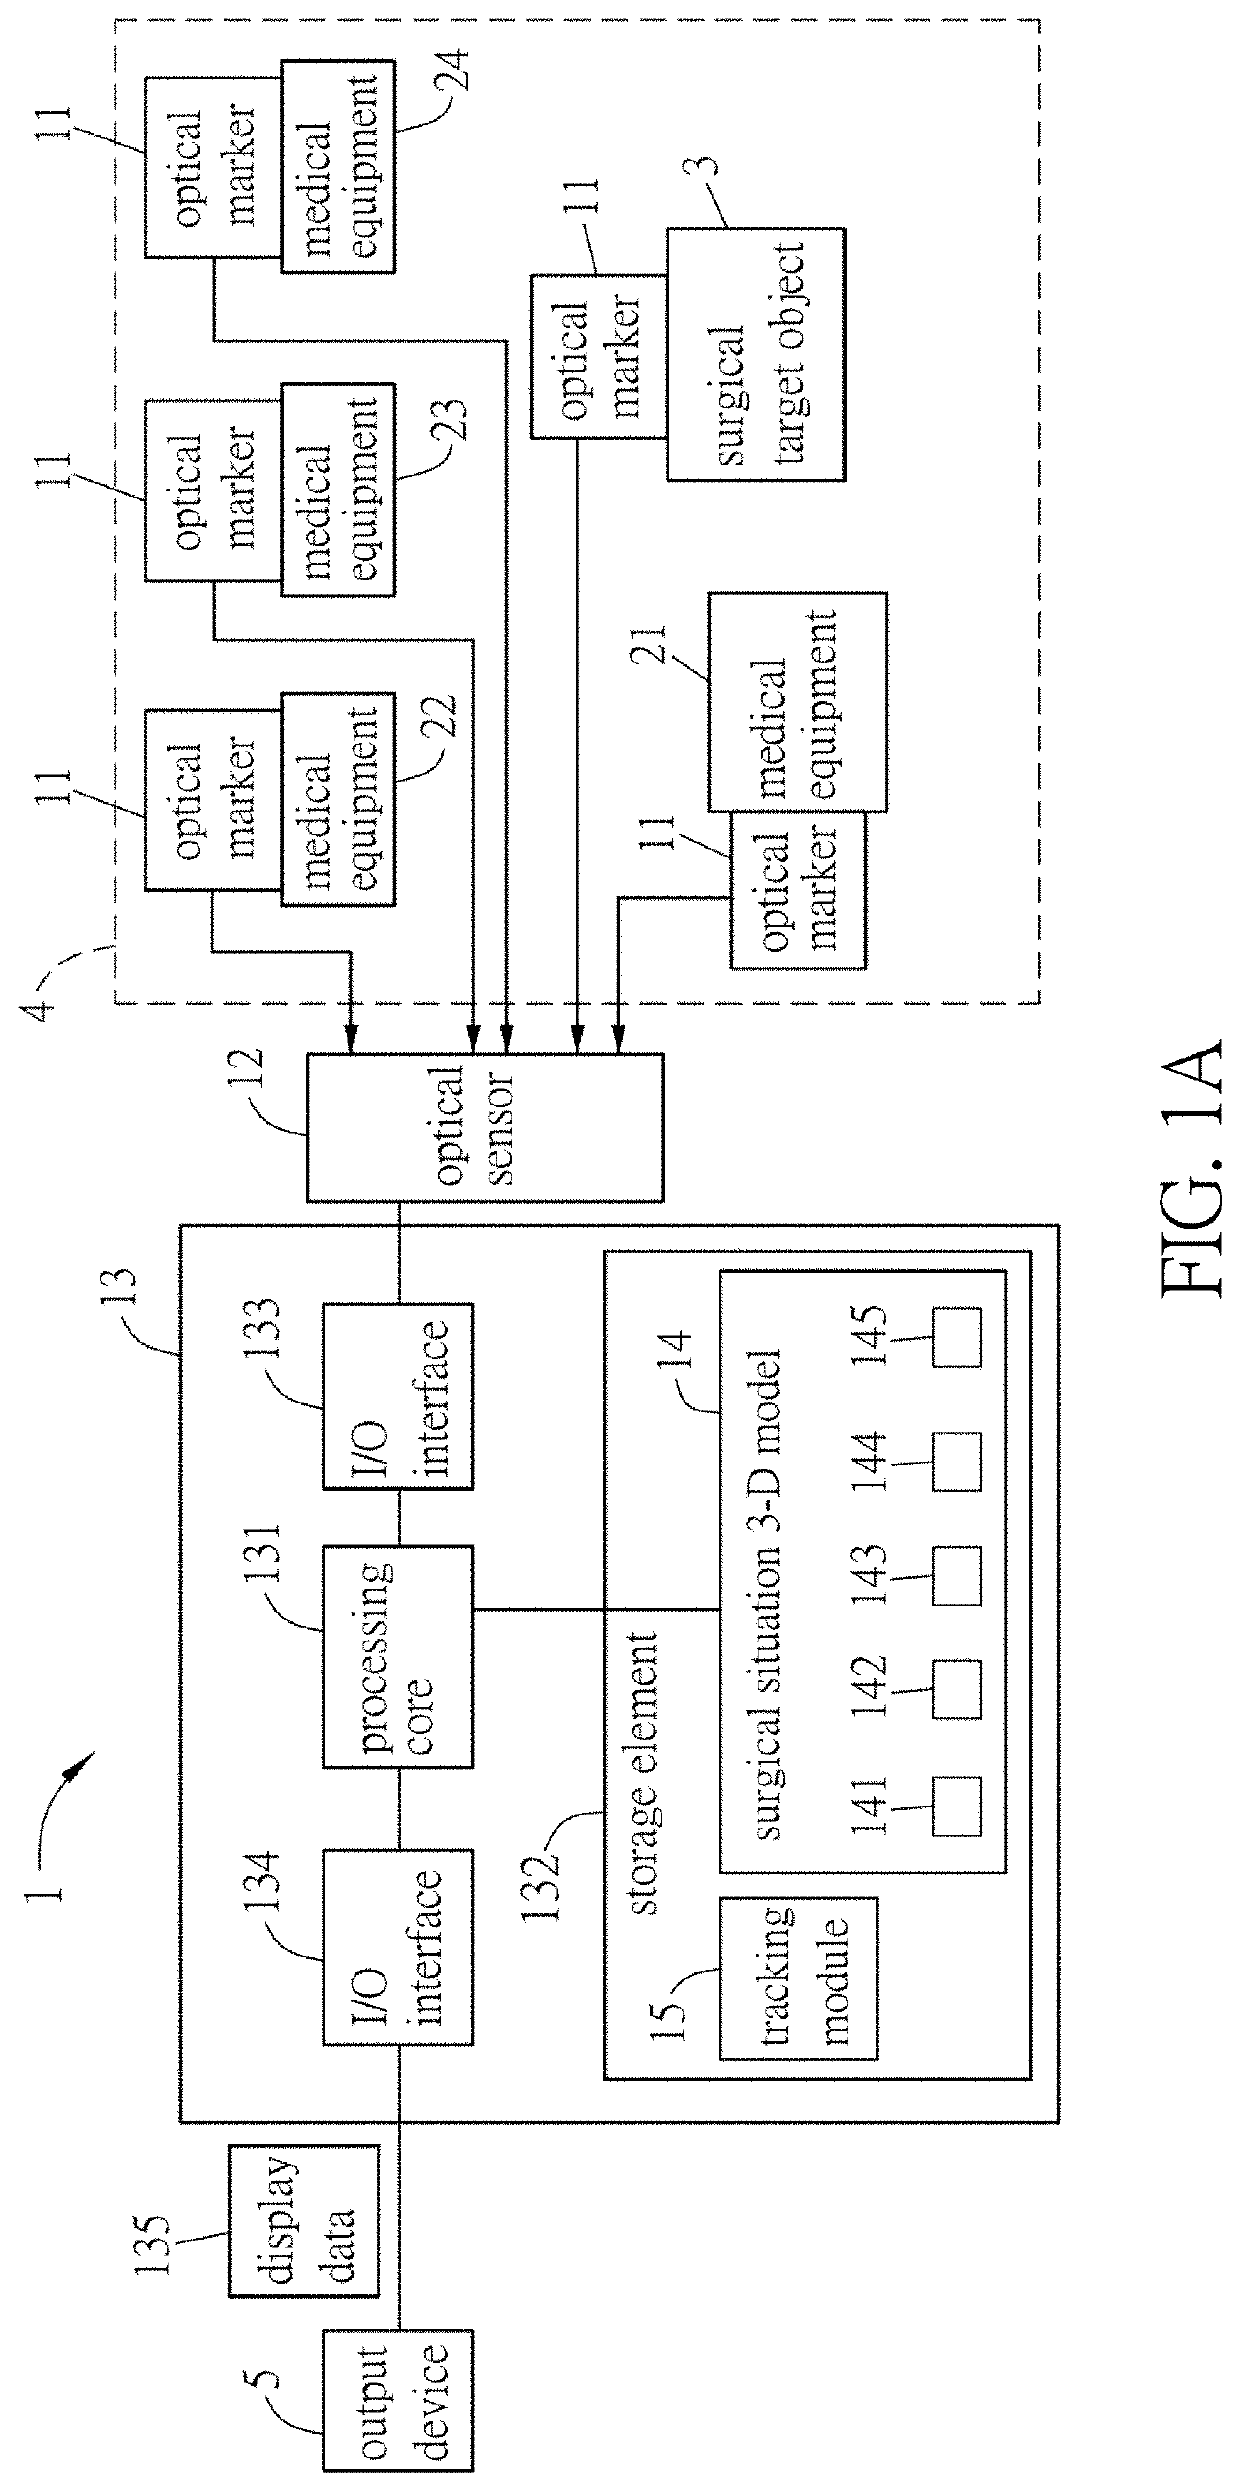 Optical tracking system and training system for medical equipment